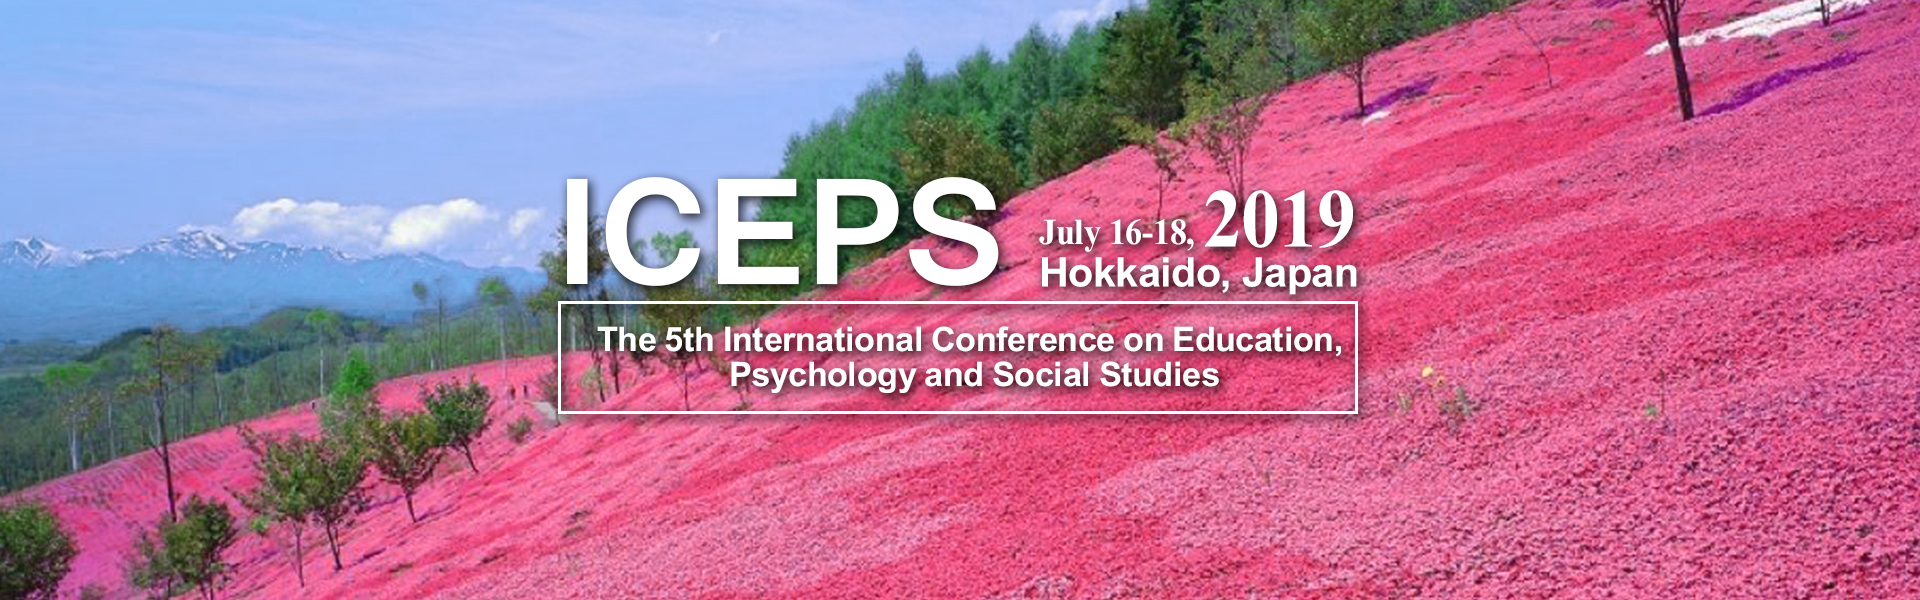 2019 ICEPS The 5th International Conference on Education, Psychology and Social Studies, Hokkaido, Japan